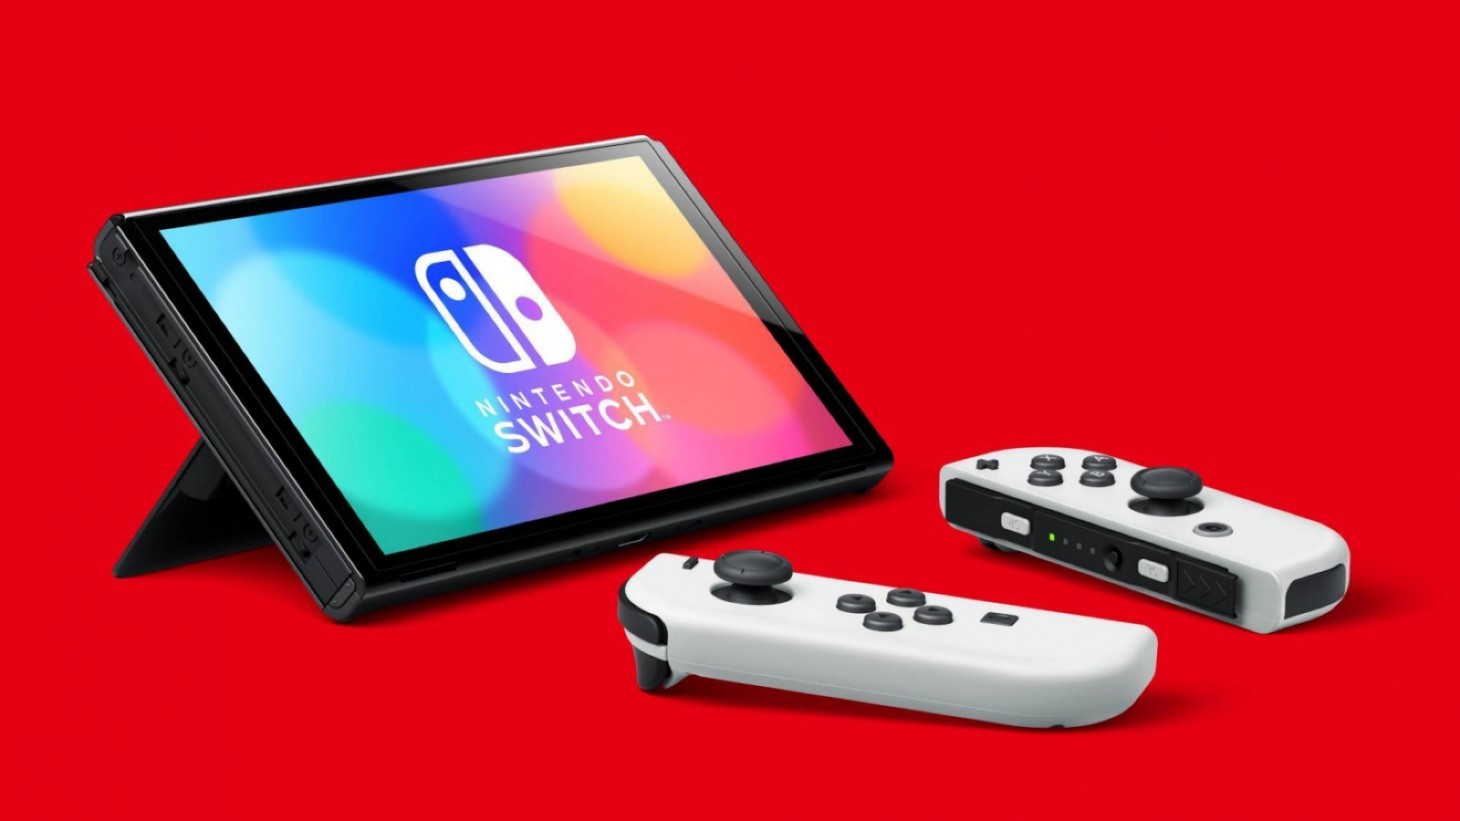 Nintendo Says It Wants To Avoid A Repeat Of Wii U With Switch's Successor